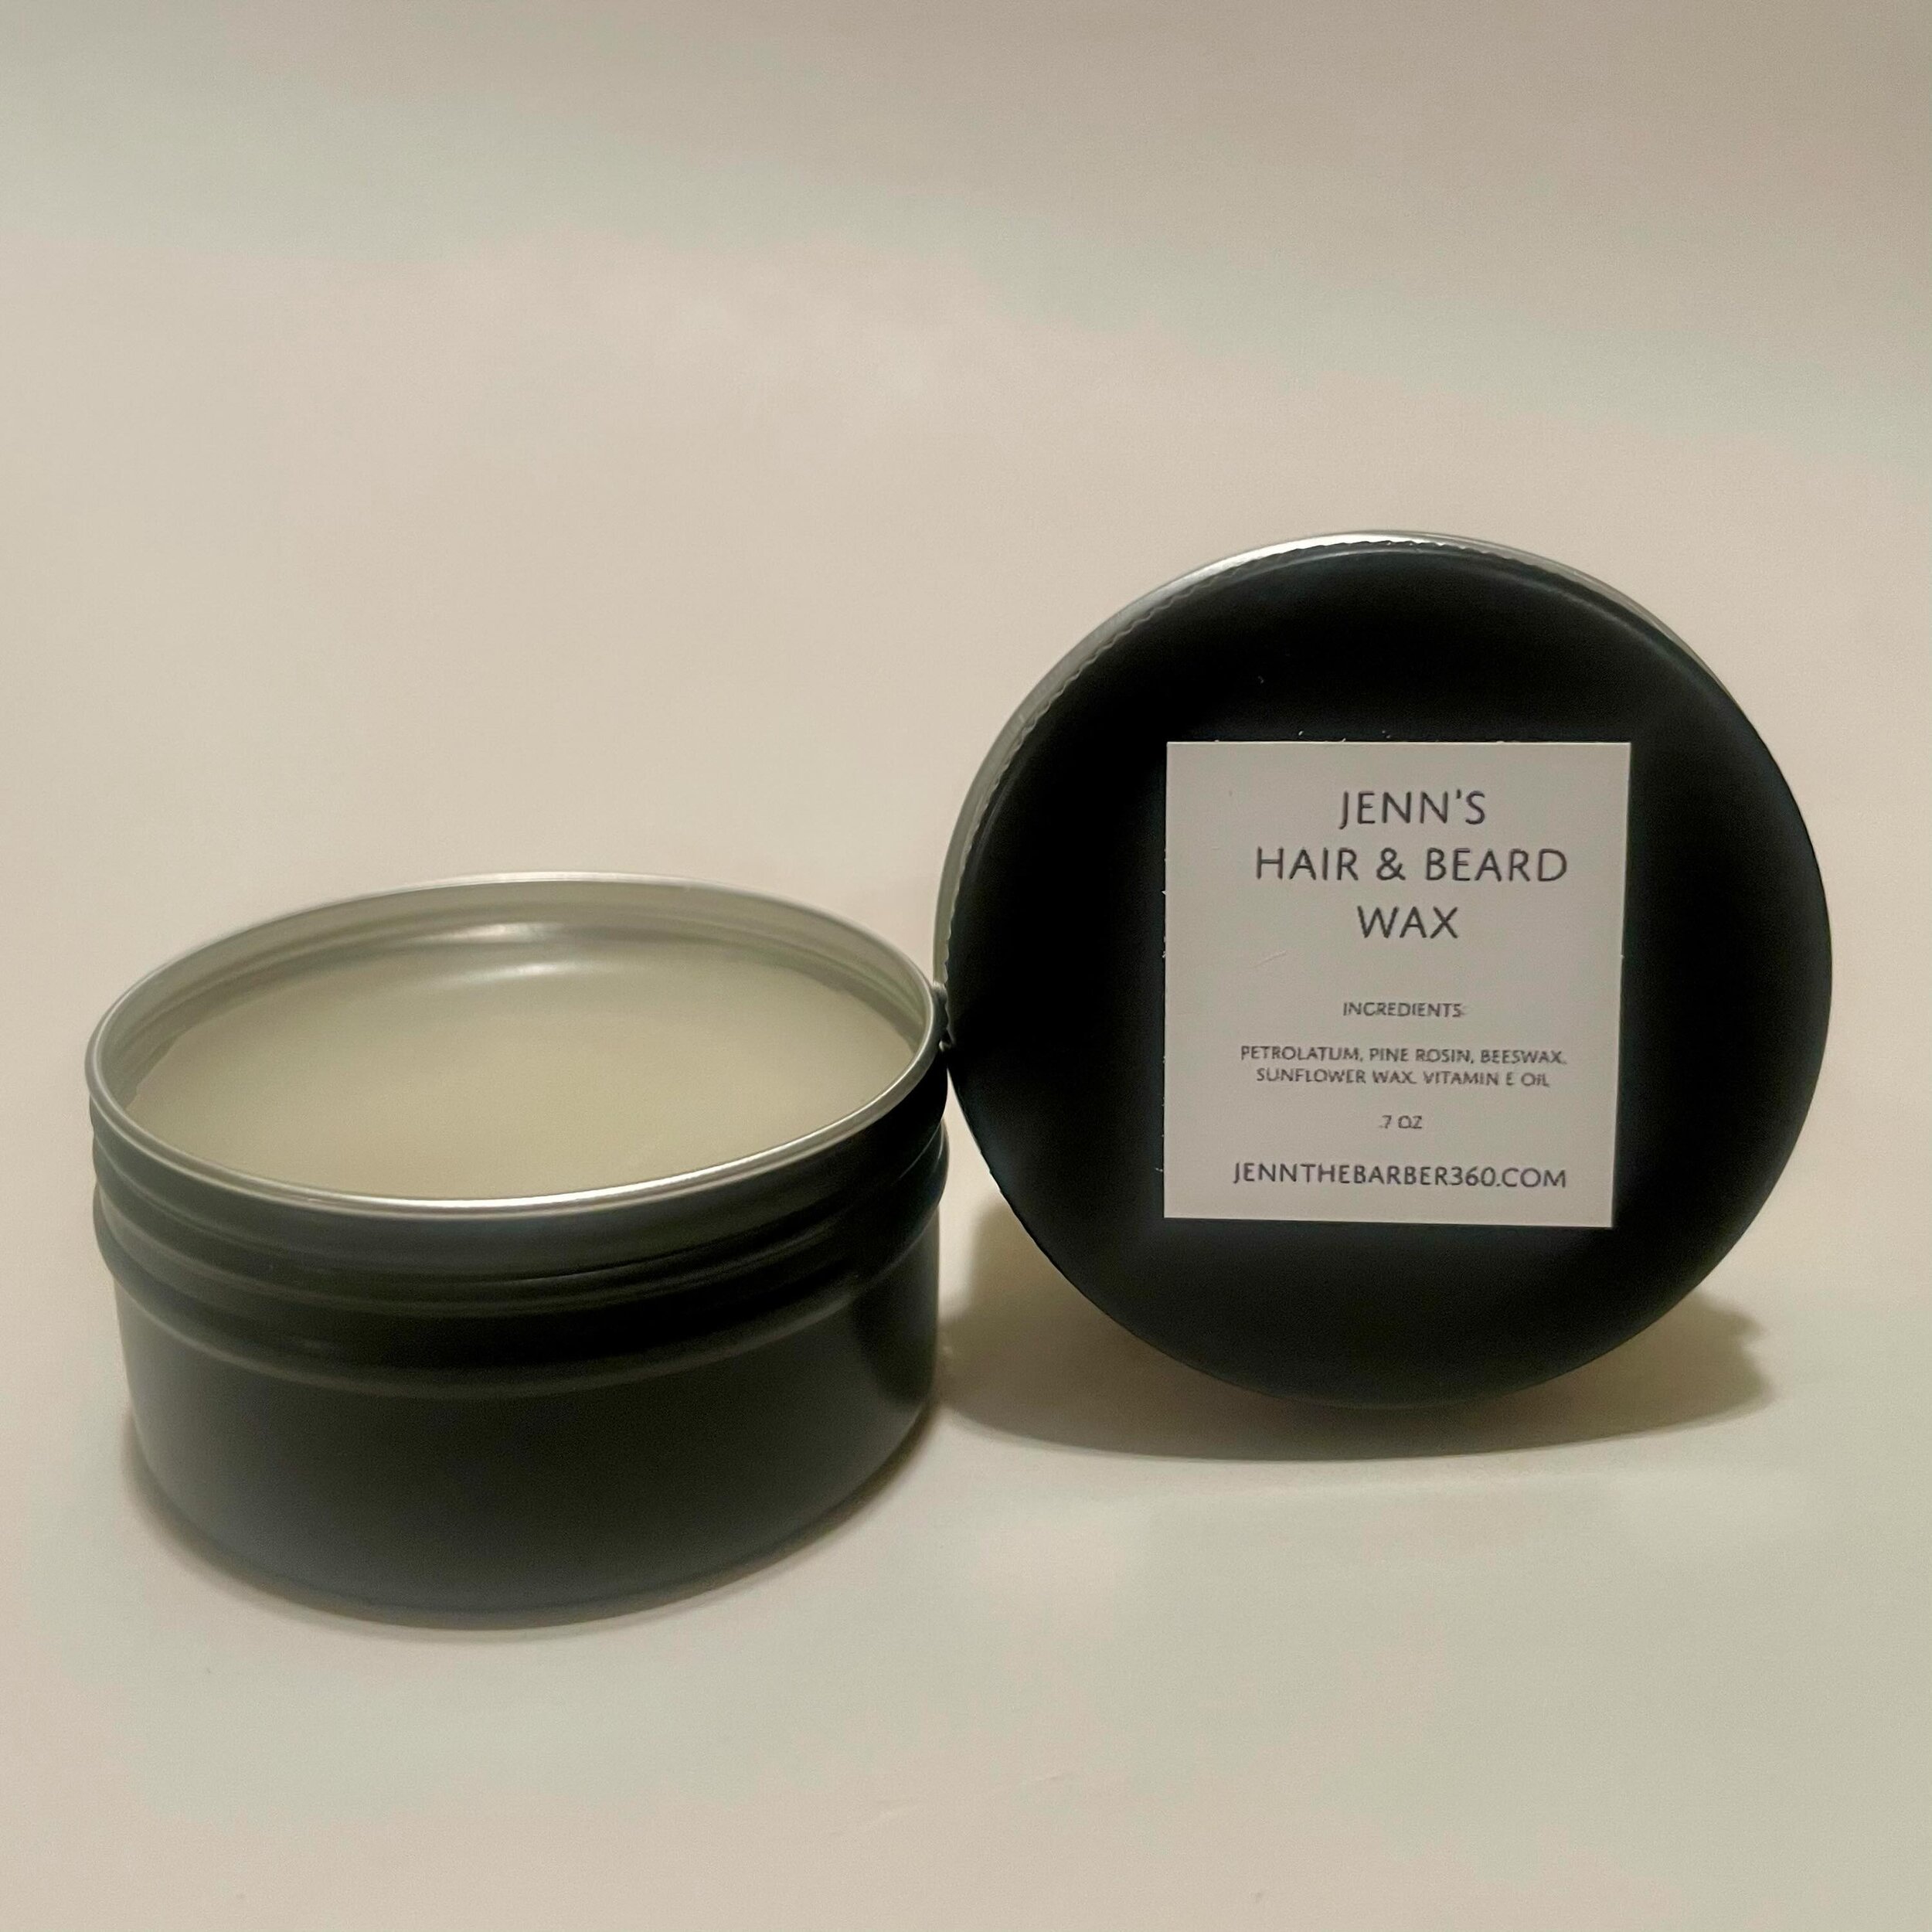 Jenn&rsquo;s Hair &amp; Beard Wax is a firm hold oil based wax pomade made to control curls and tame unruly beards. Formulated with thick, coarse hair in mind, it is incredibly moisturizing and will hold your style all day long.